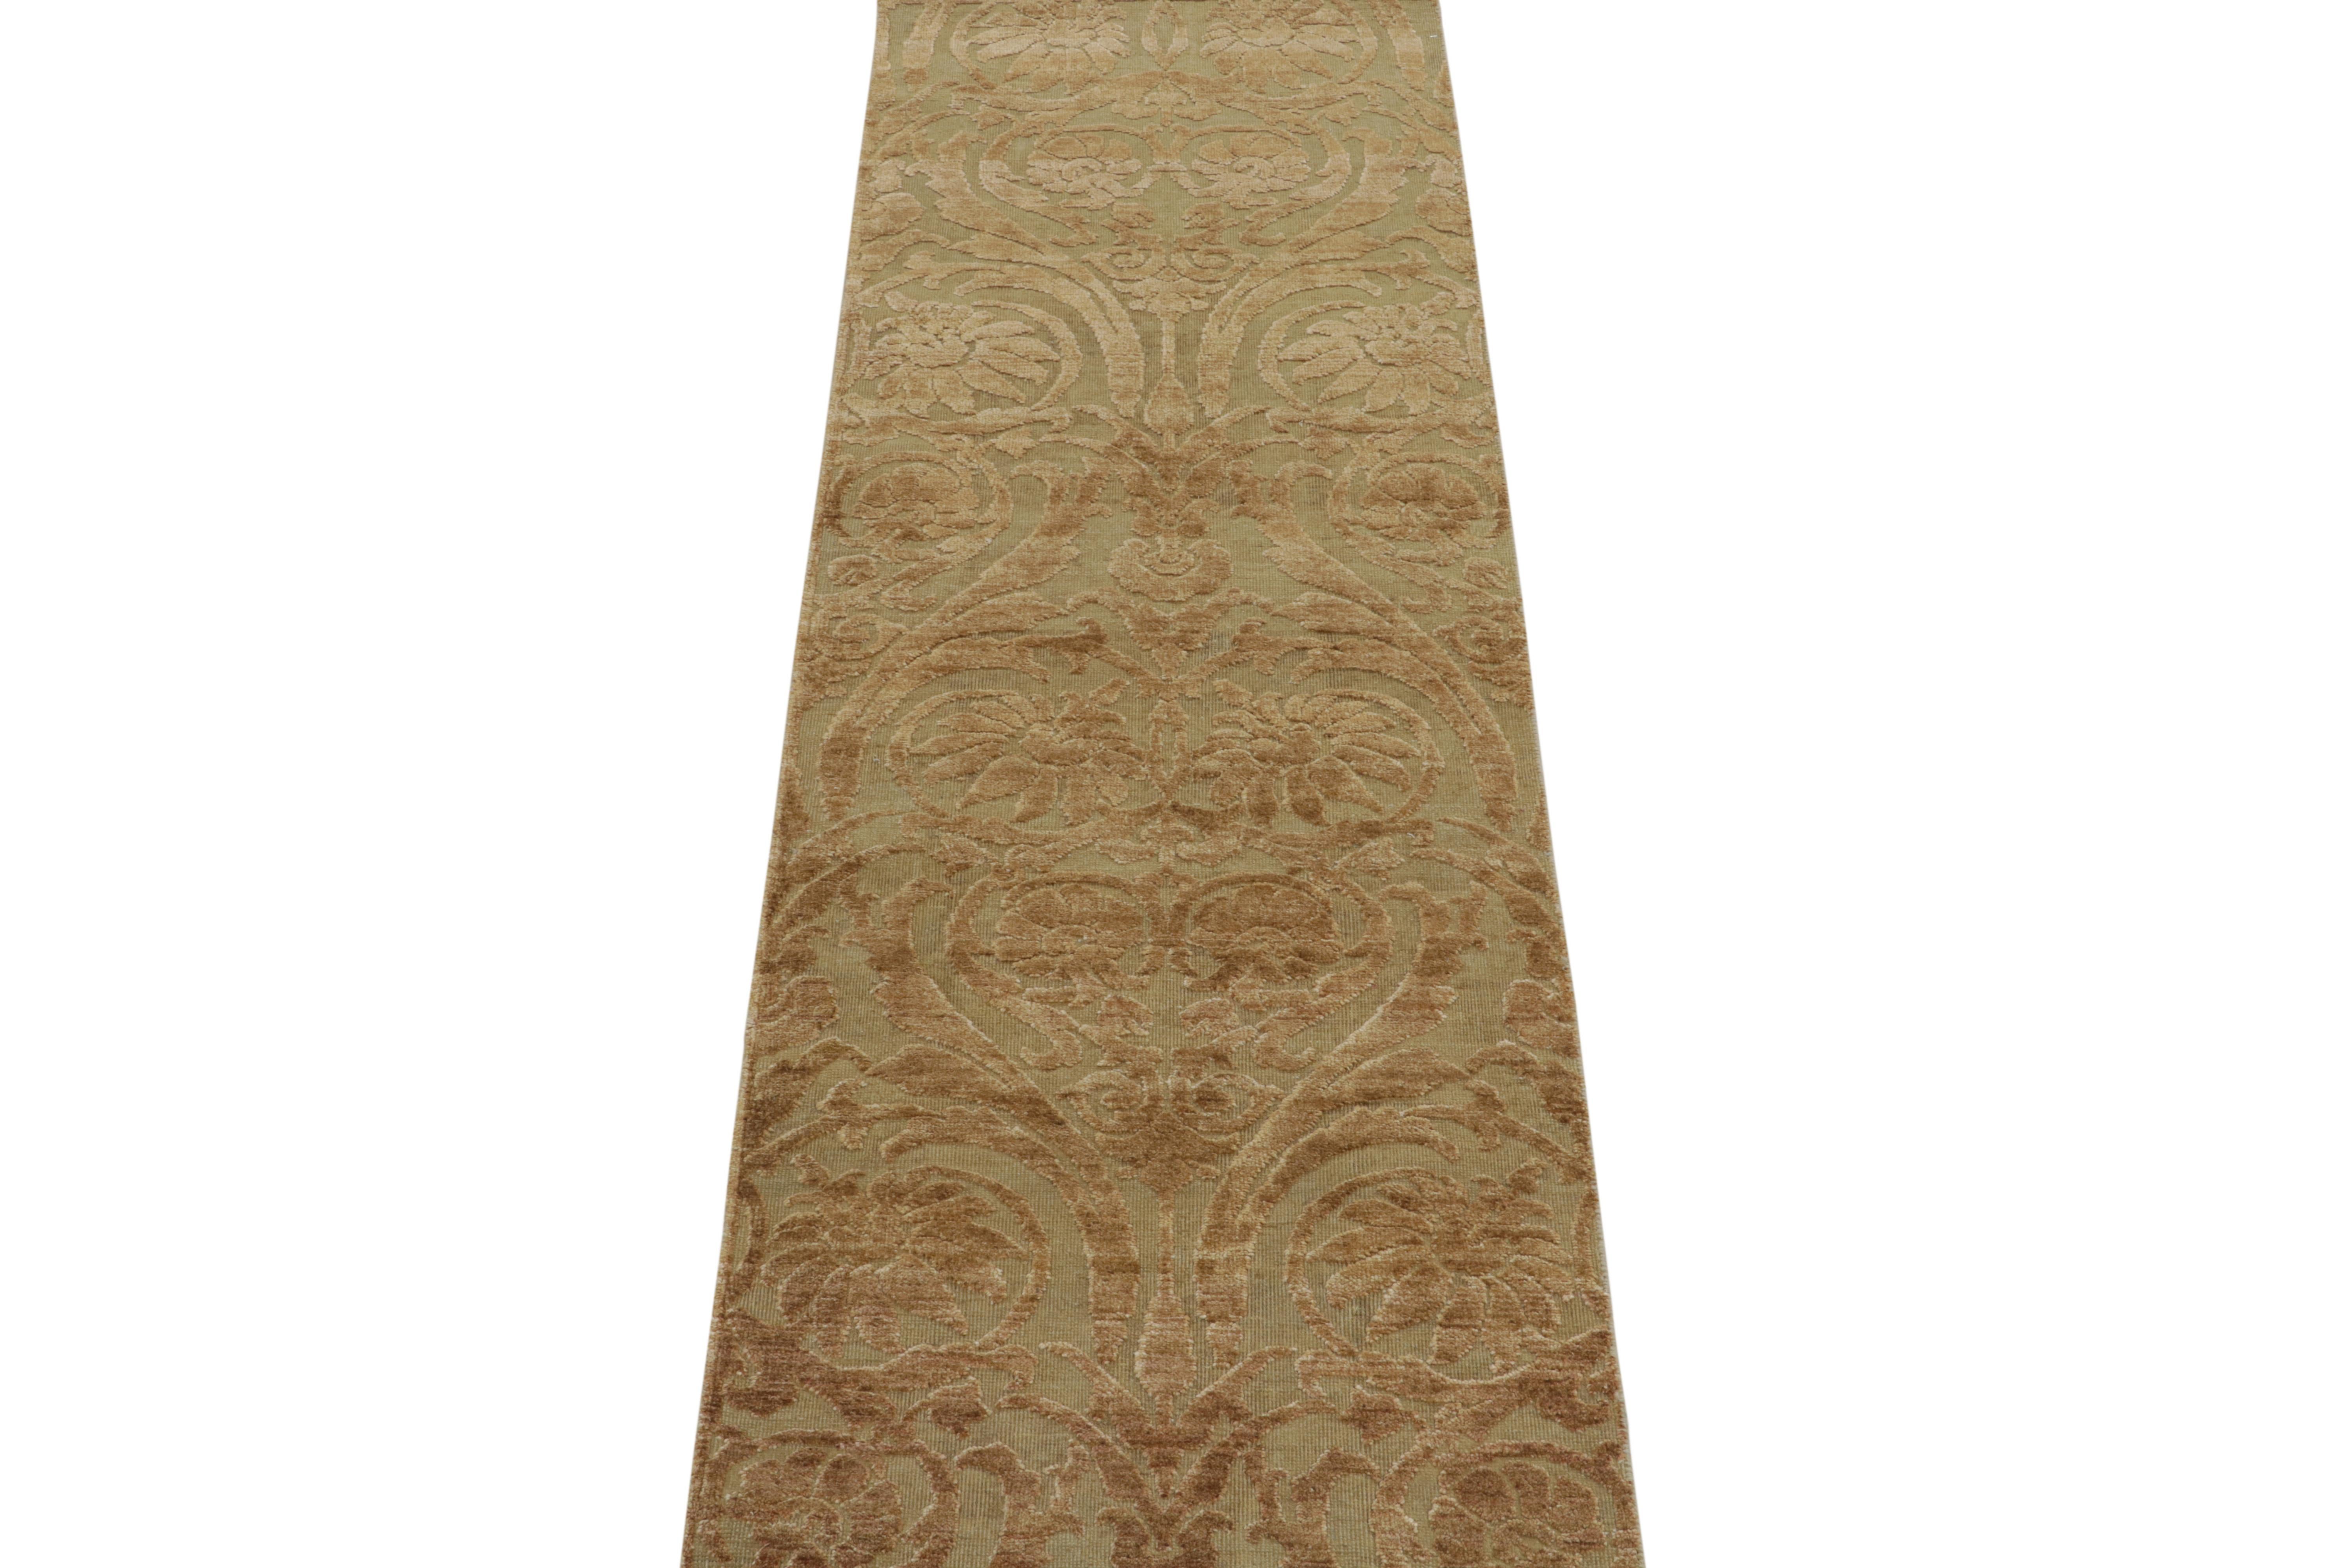 Indian Rug & Kilim’s European Style Runner in Beige with Brown Floral Patterns For Sale